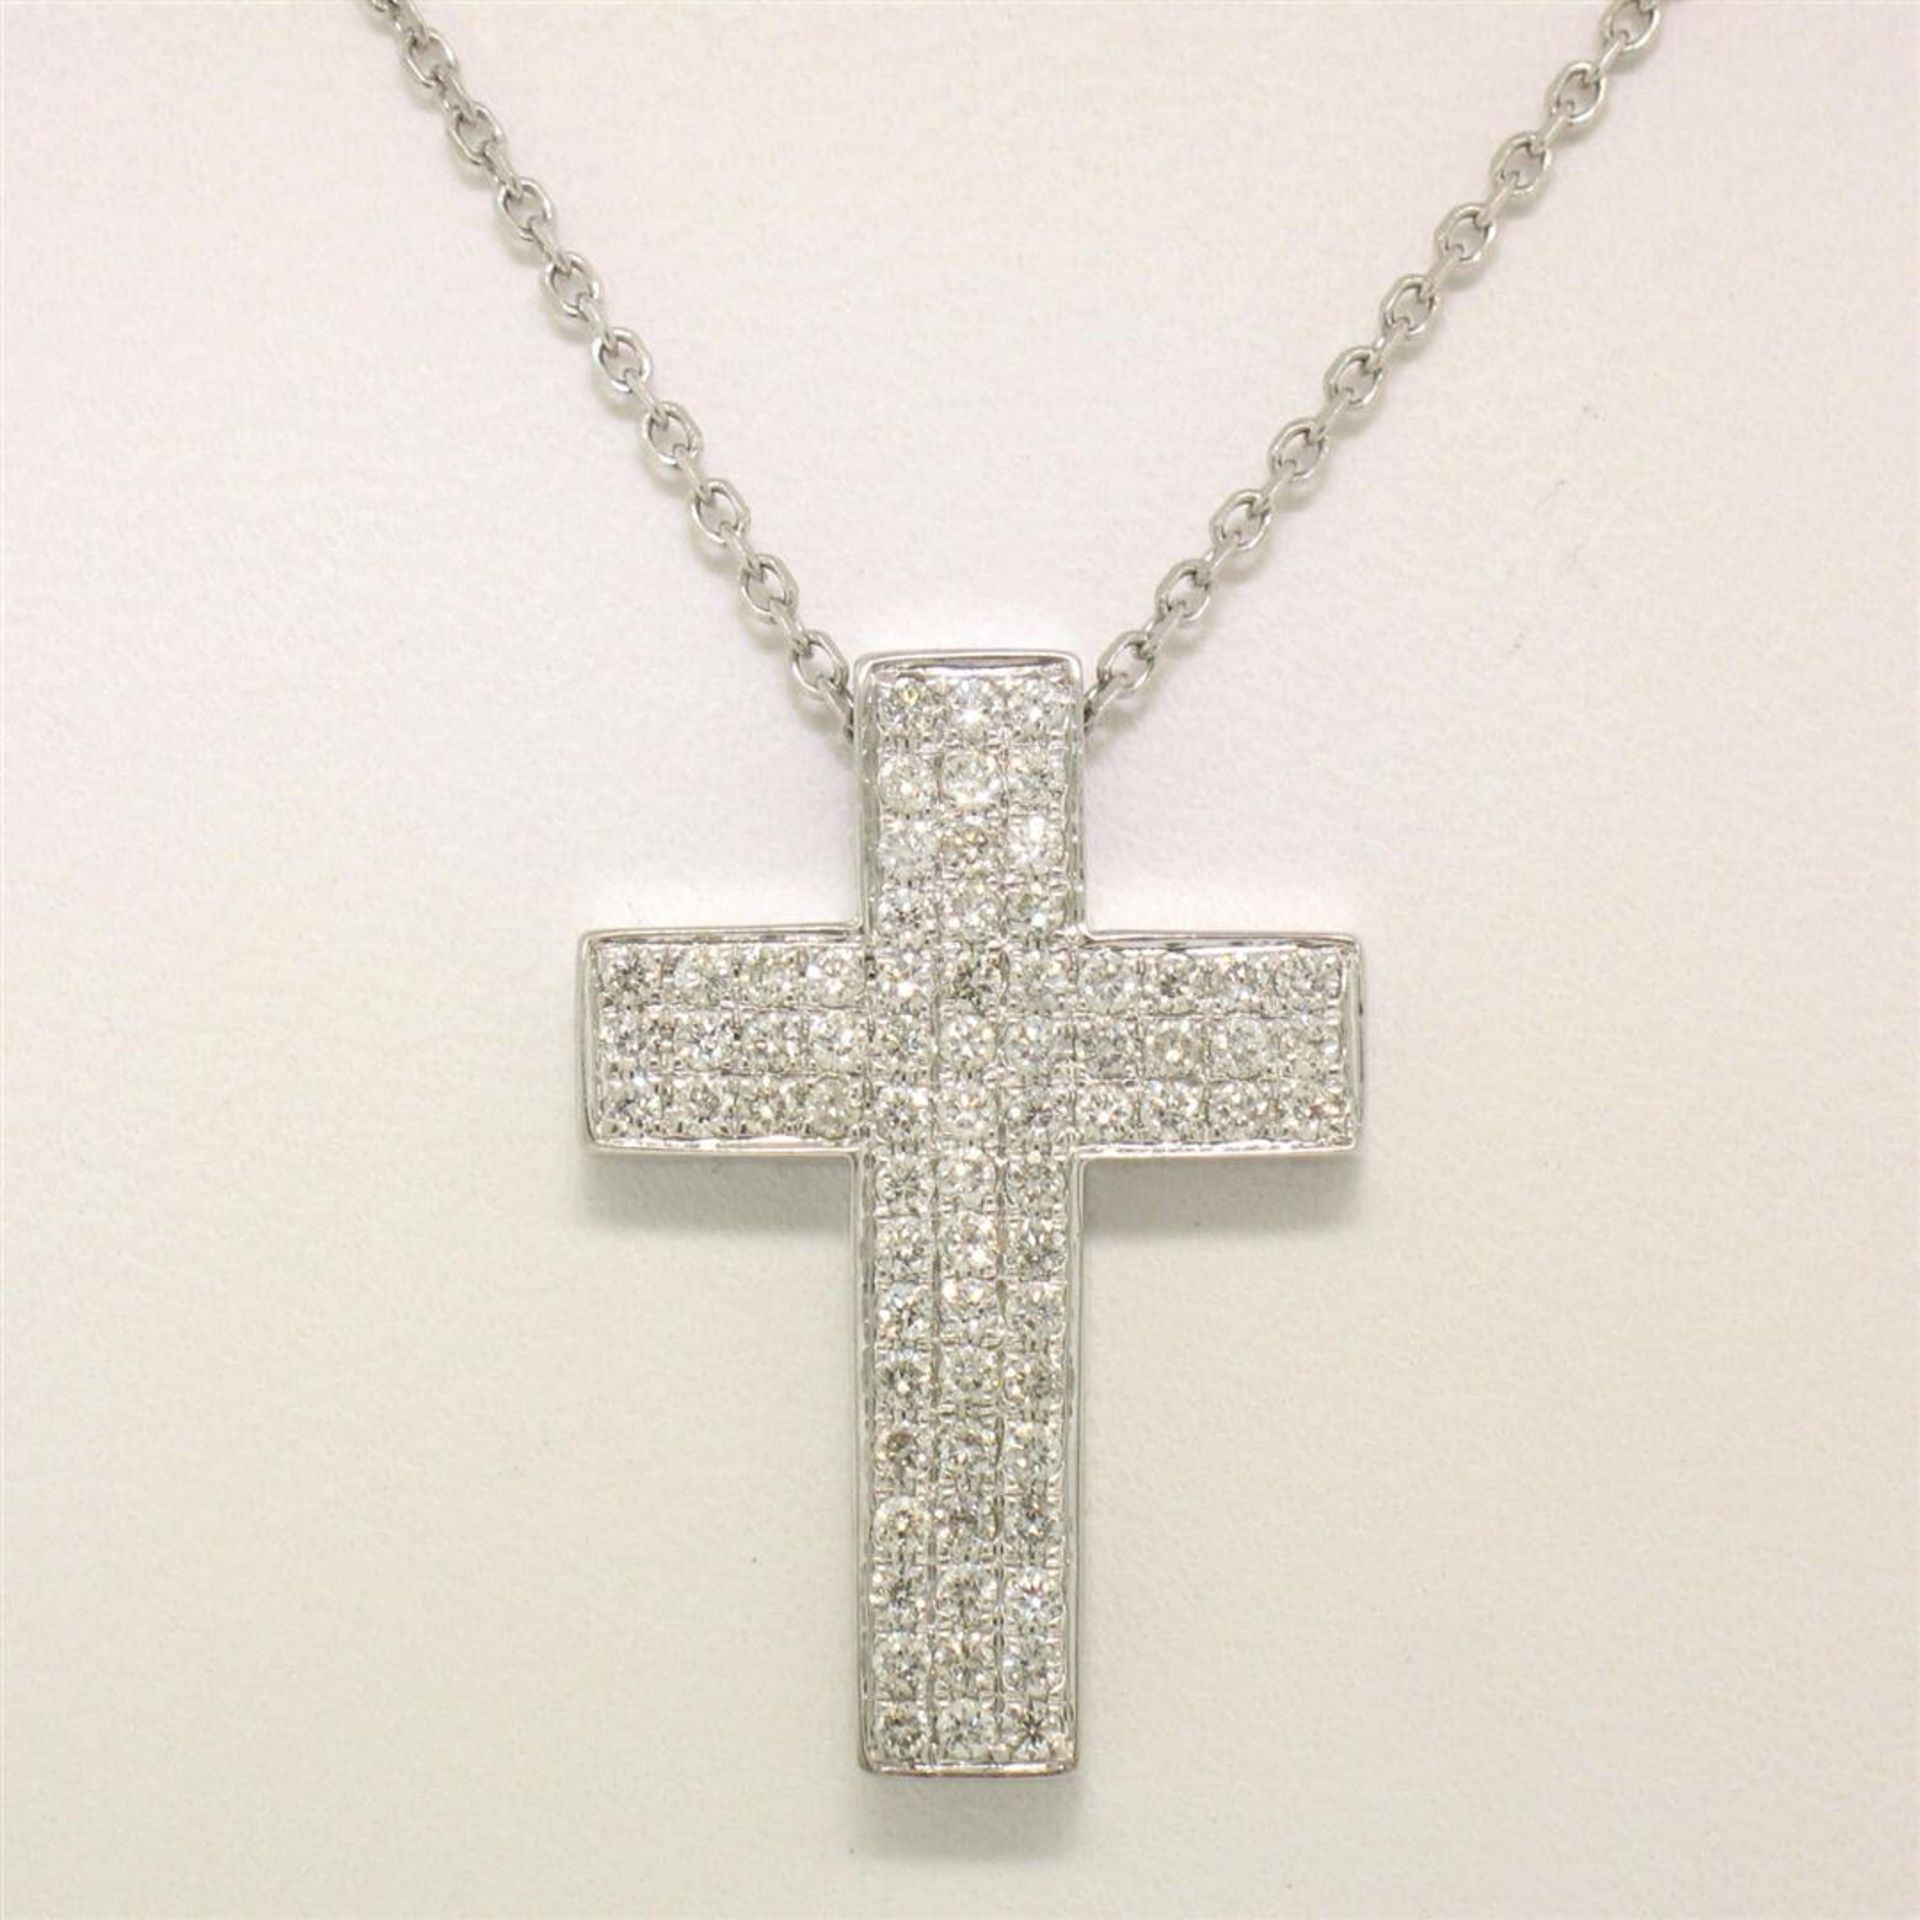 14K White Gold 0.51 ctw Micro Pave Diamond Cross Pendant w/ 18" Cable Link Chain - Image 3 of 8